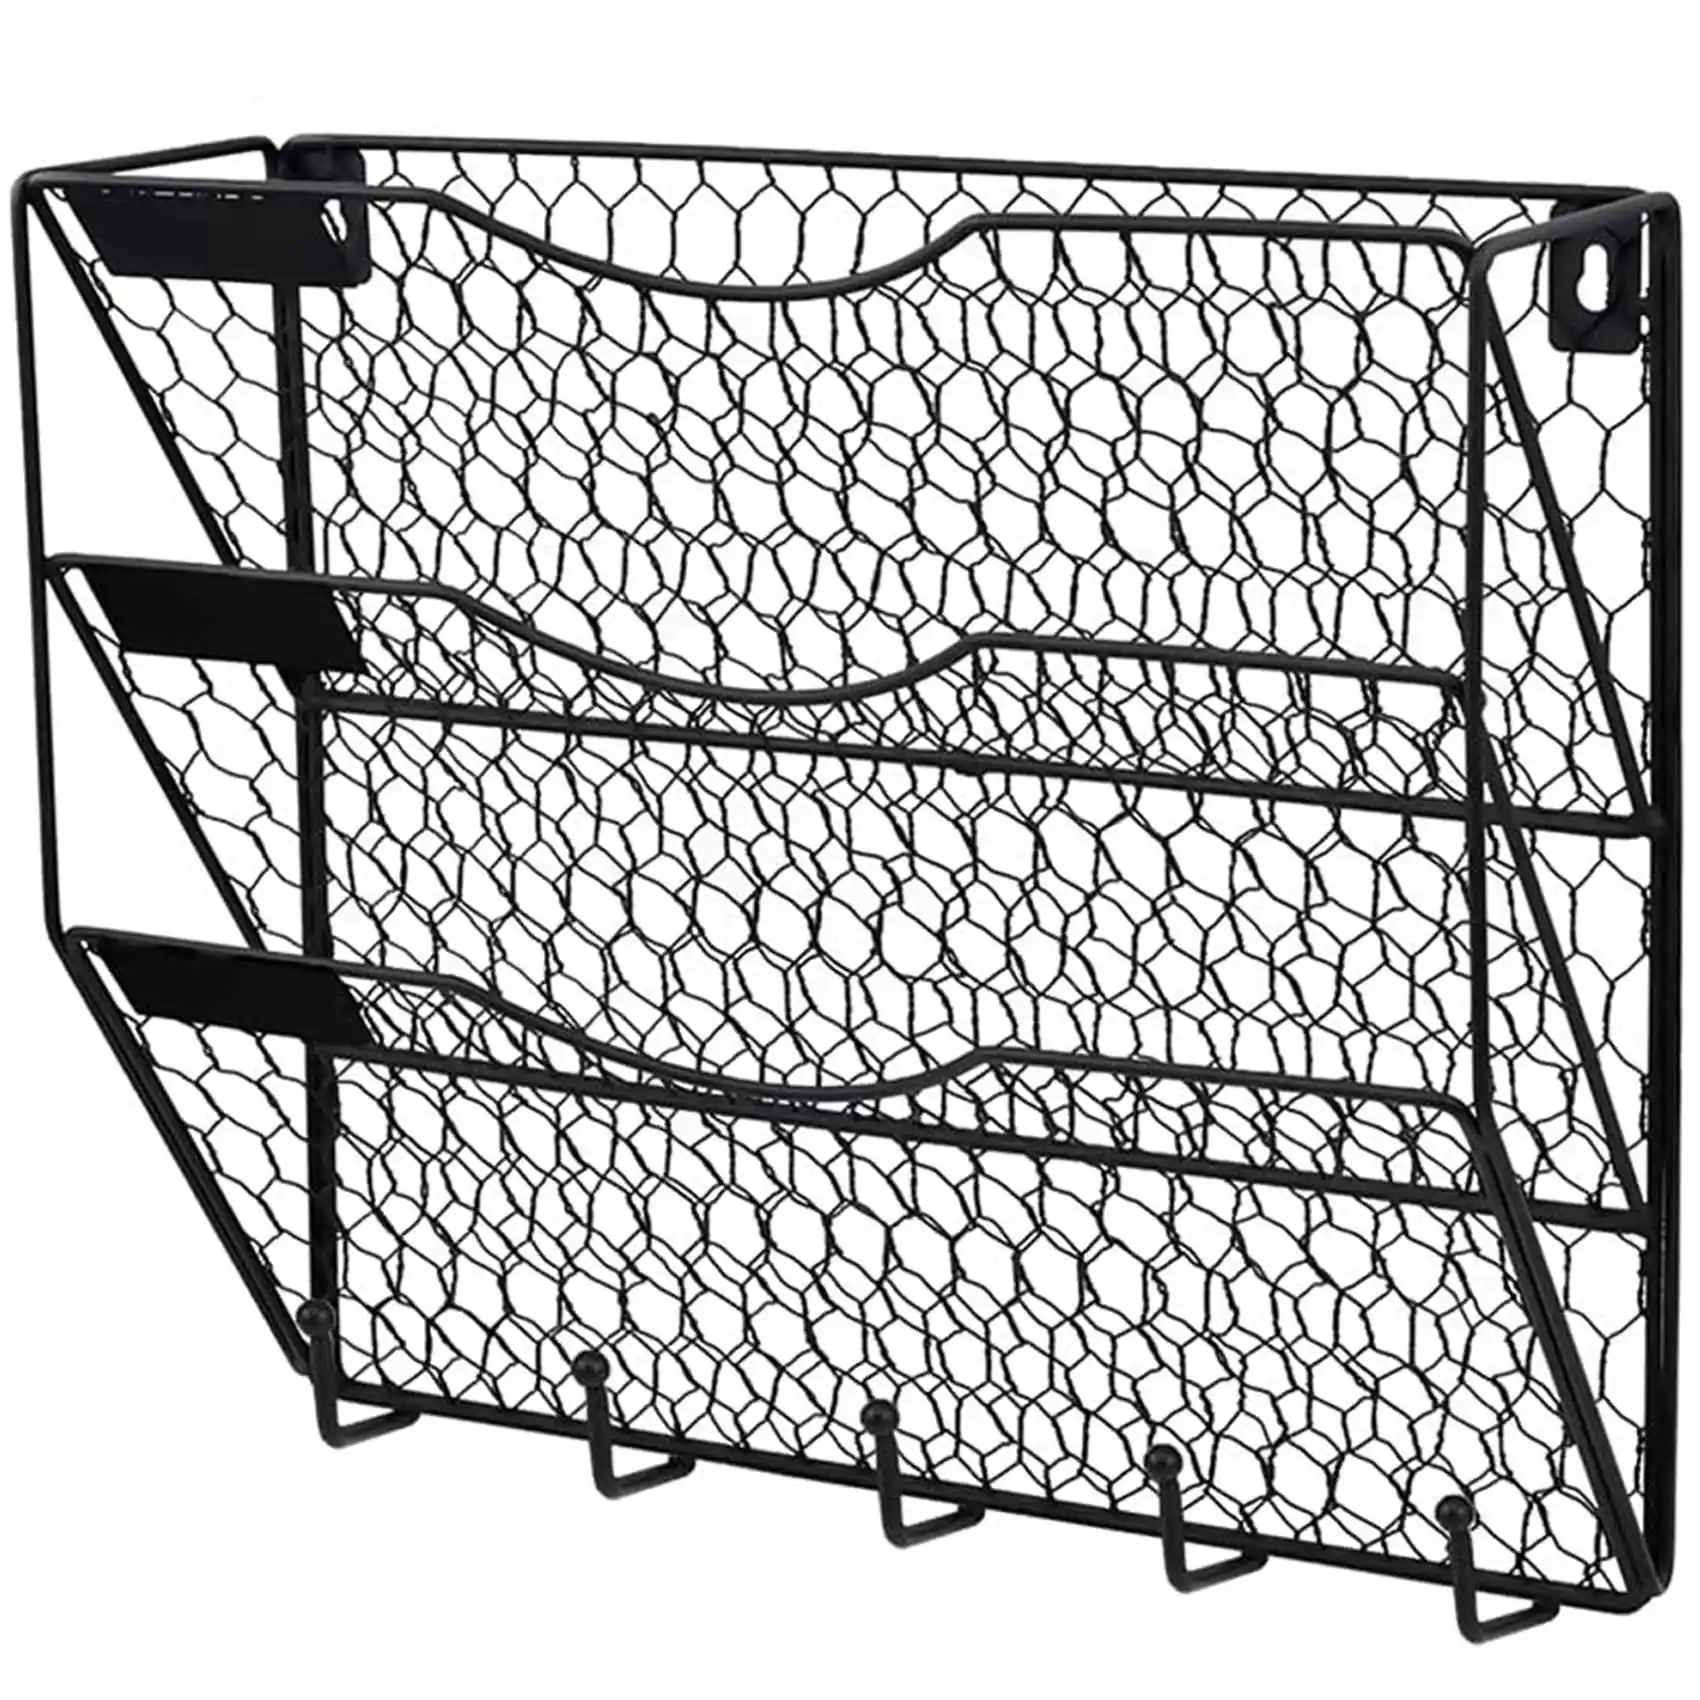 

3-Layer Wall-Mounted File Folder with Hook, Hanging Mail Organizermetal Chicken Wire Wall-Mounted Magazine Rack Black